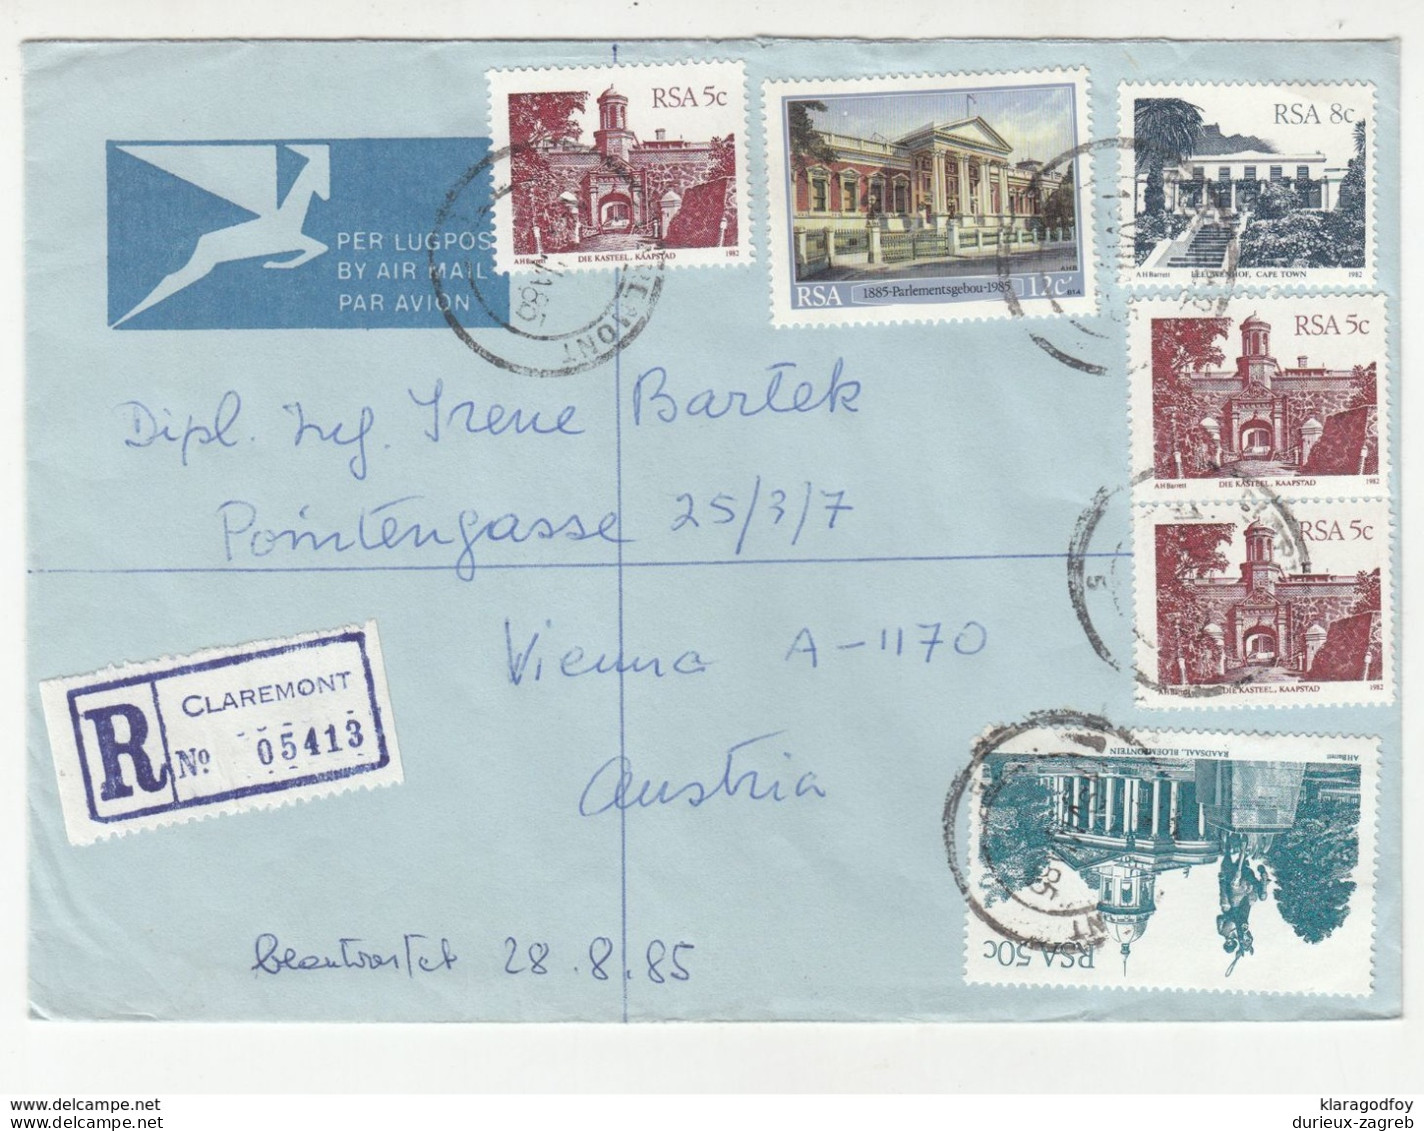 South Africa, Letter Cover Registered Posted 1985 Claremont Pmk B200720 - Covers & Documents